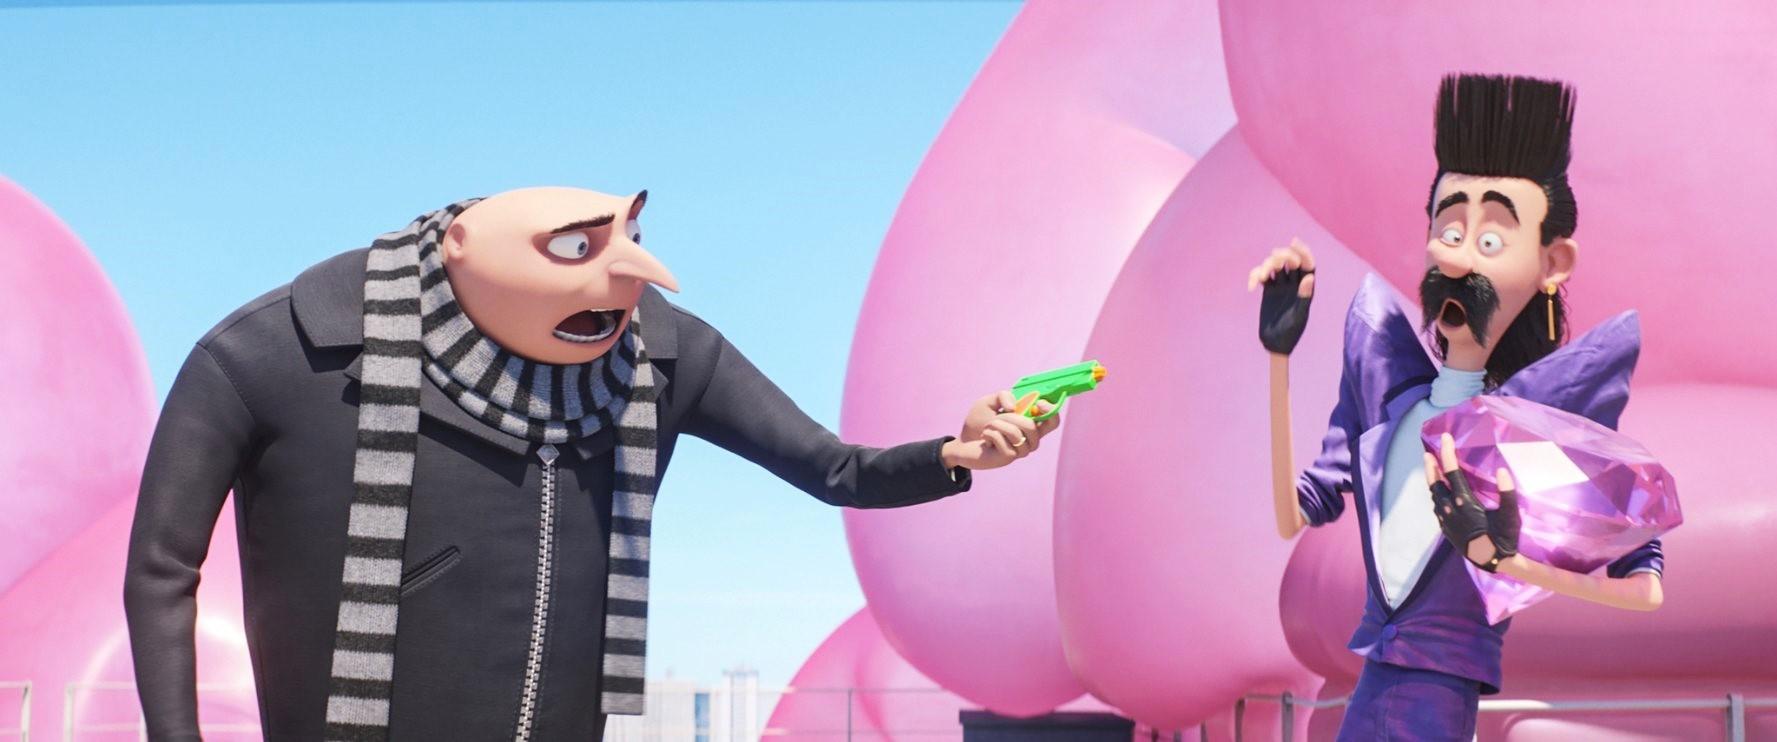 Gru and Balthazar Bratt from Universal Pictures' Despicable Me 3 (2017)